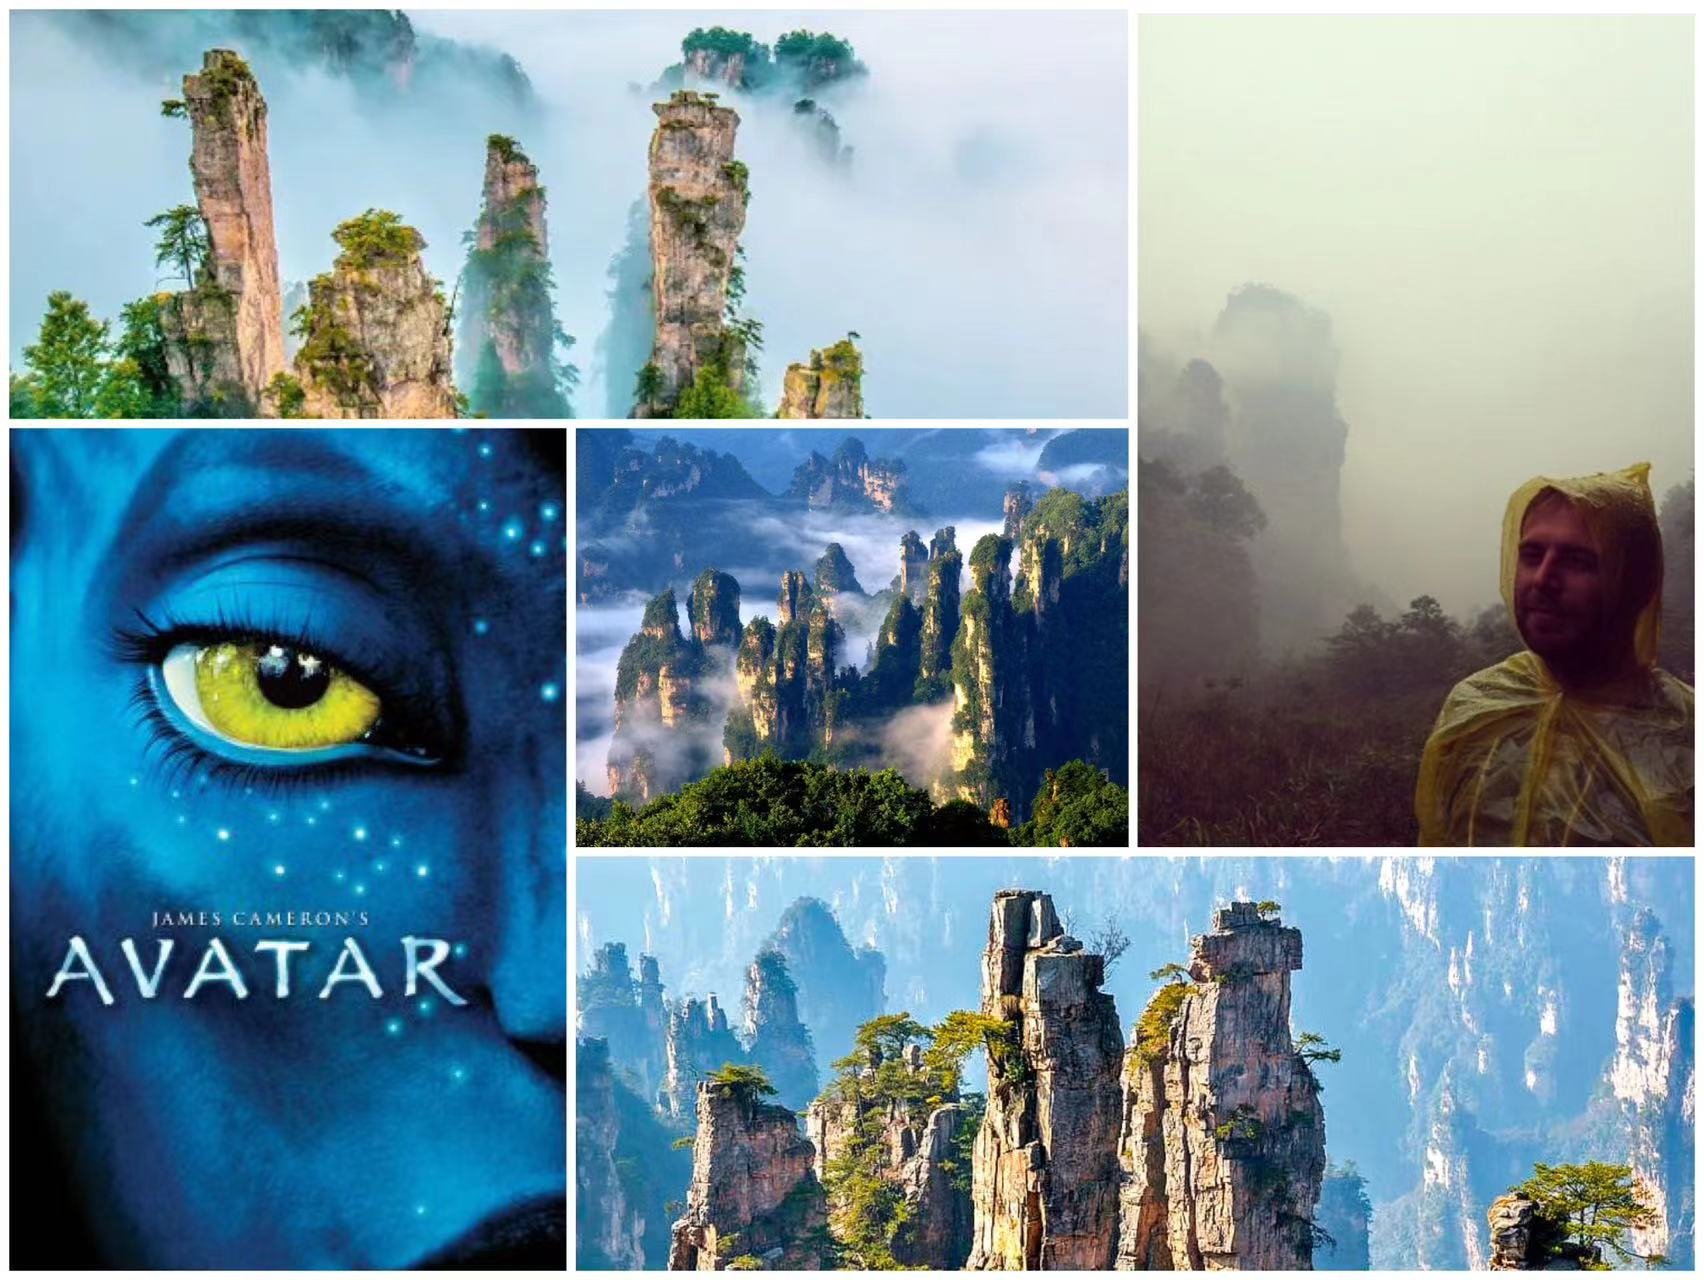 Laodai's favourite destination in China: 张家界 [Zhāngjiājiè], which was one of the inspirations behind the film Avatar.